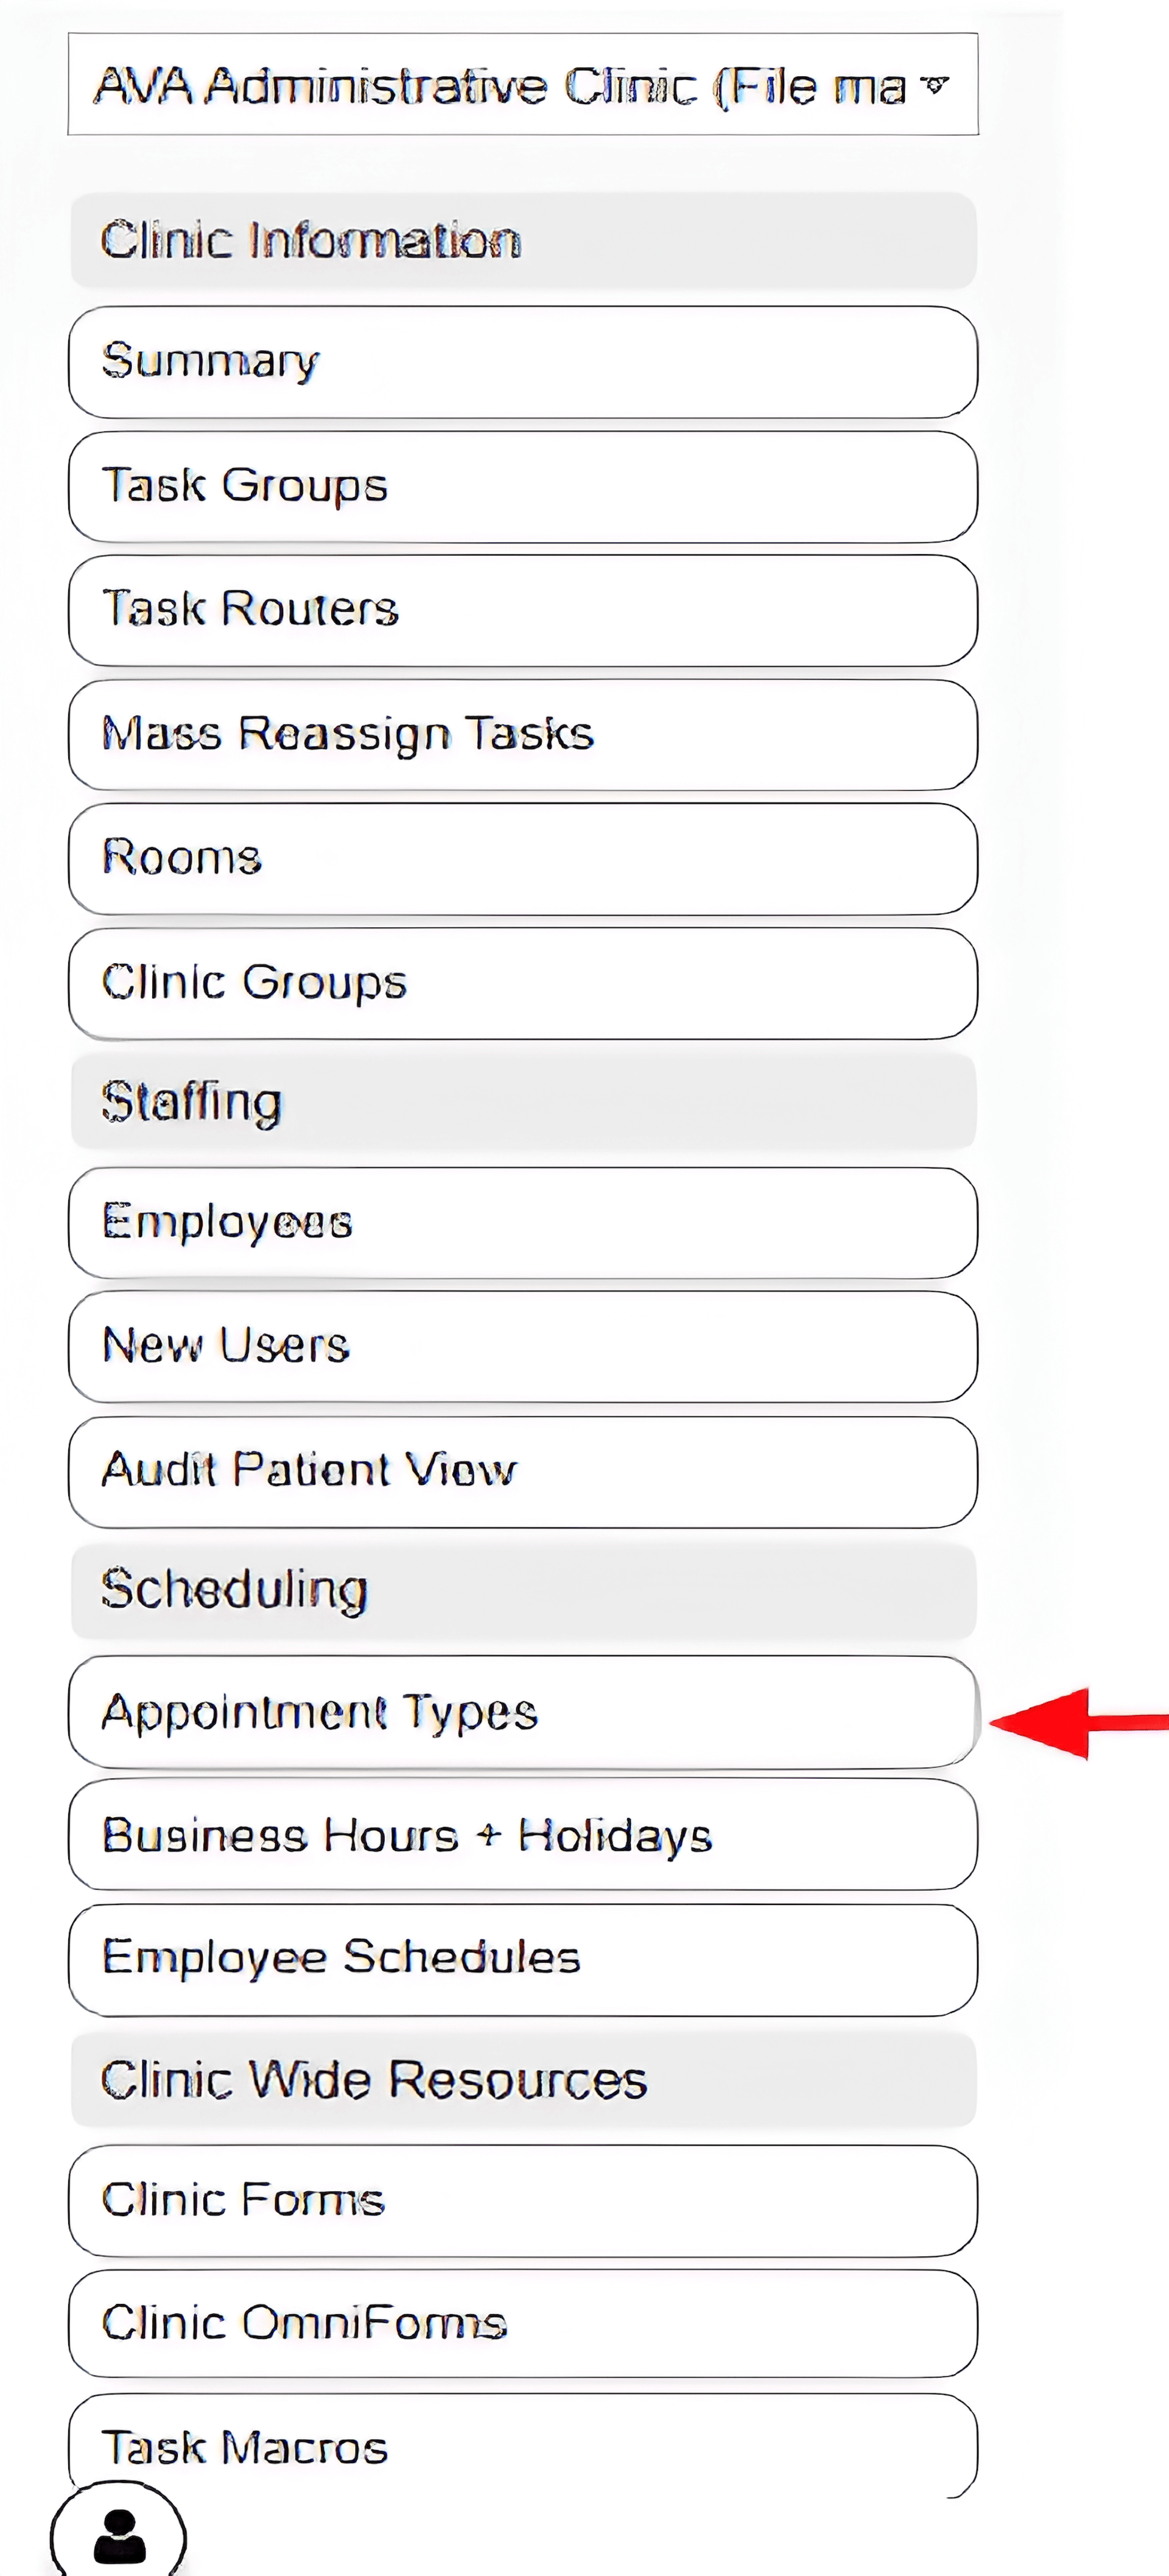 Menu bar with the 'Appointment Types' button highlighted in red.